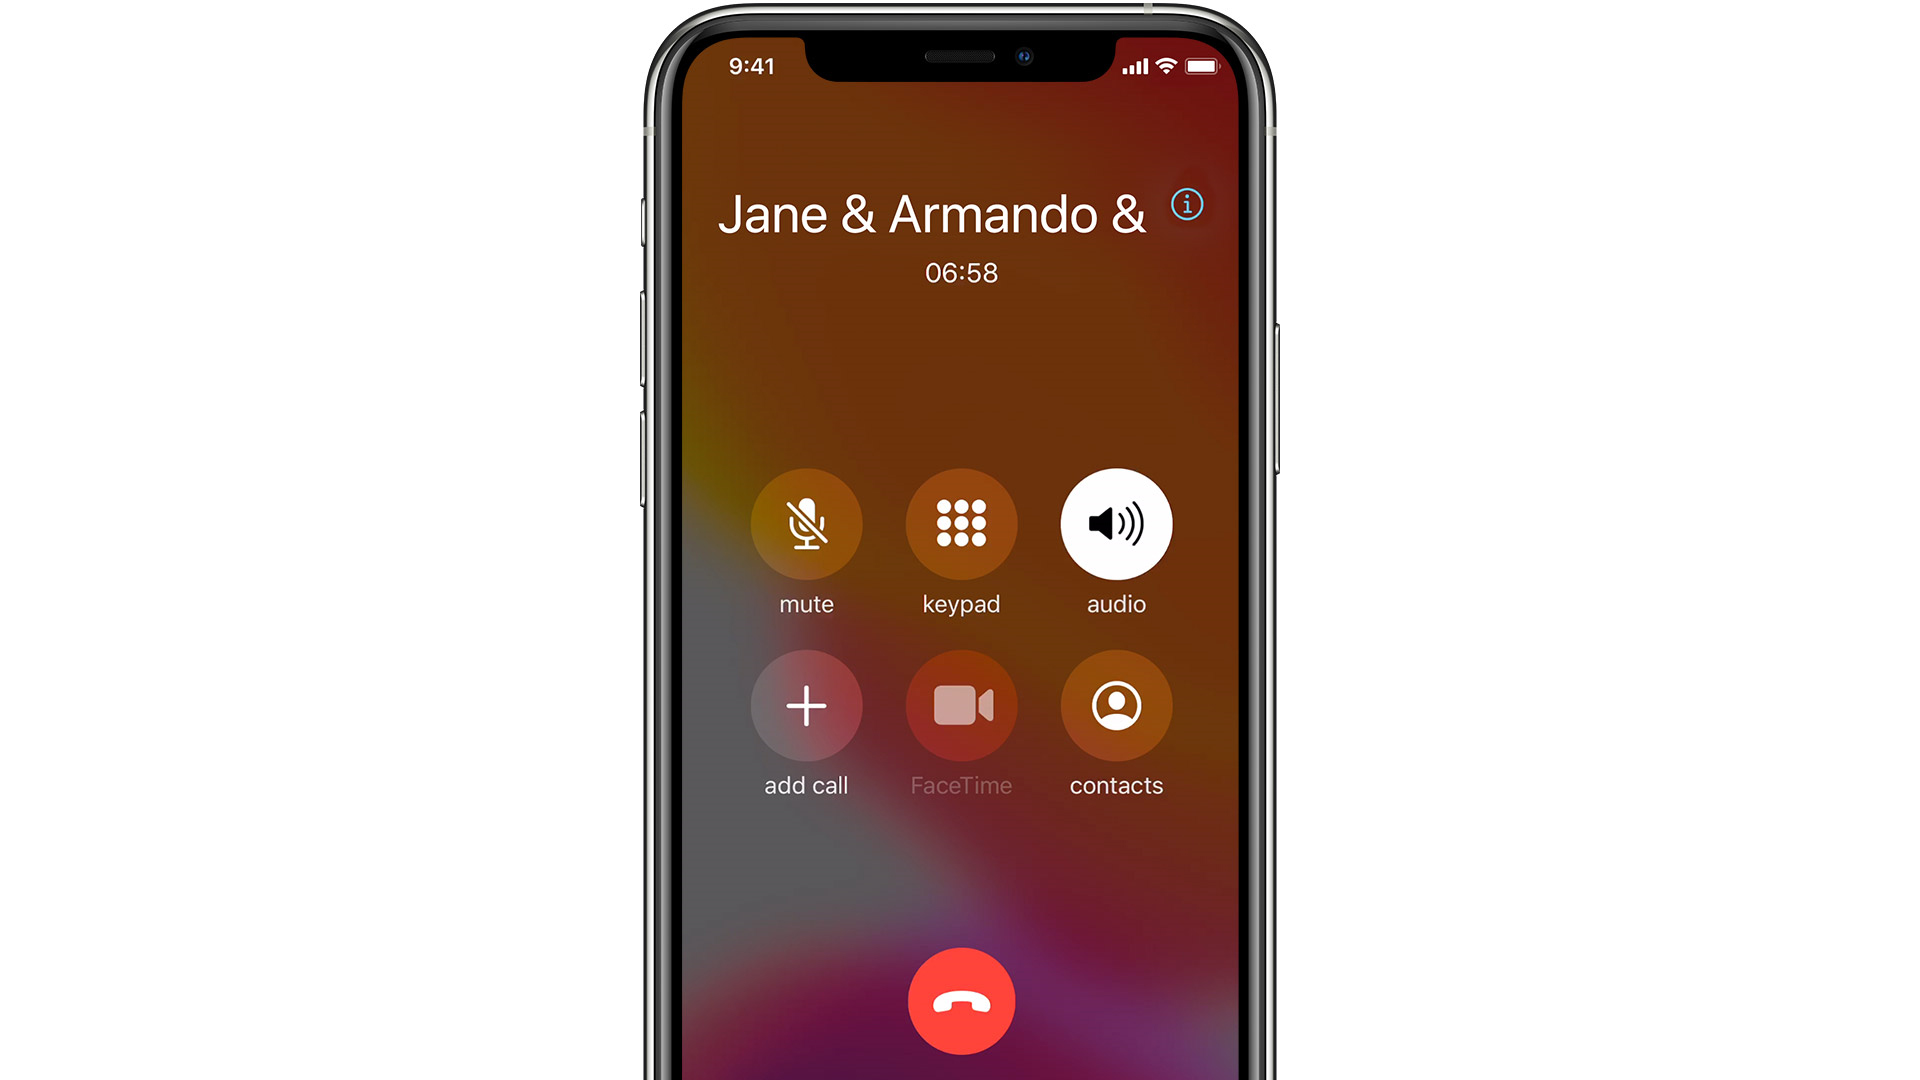 The iPhone call interface